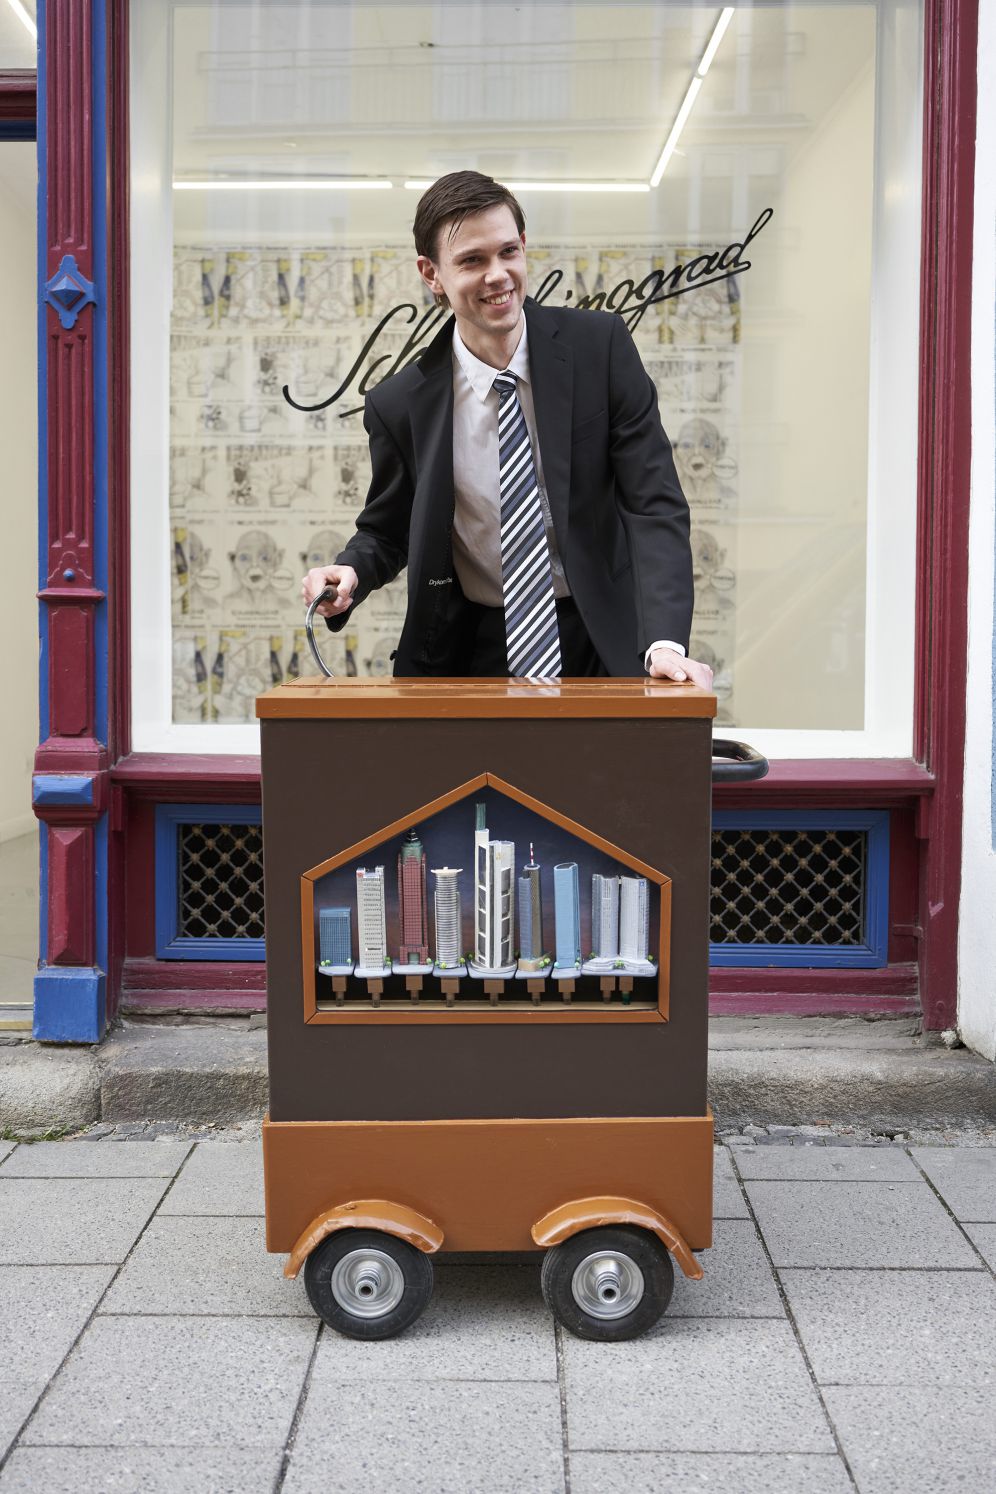 Skyline Organ (Frankfurz), 2021, customized barrel organ, brass pipes covered with architectural models made from cardboard, aluminum foil and acrylic paint, customized punchcard „Wind of Change“, 100 x 80 x 60cm